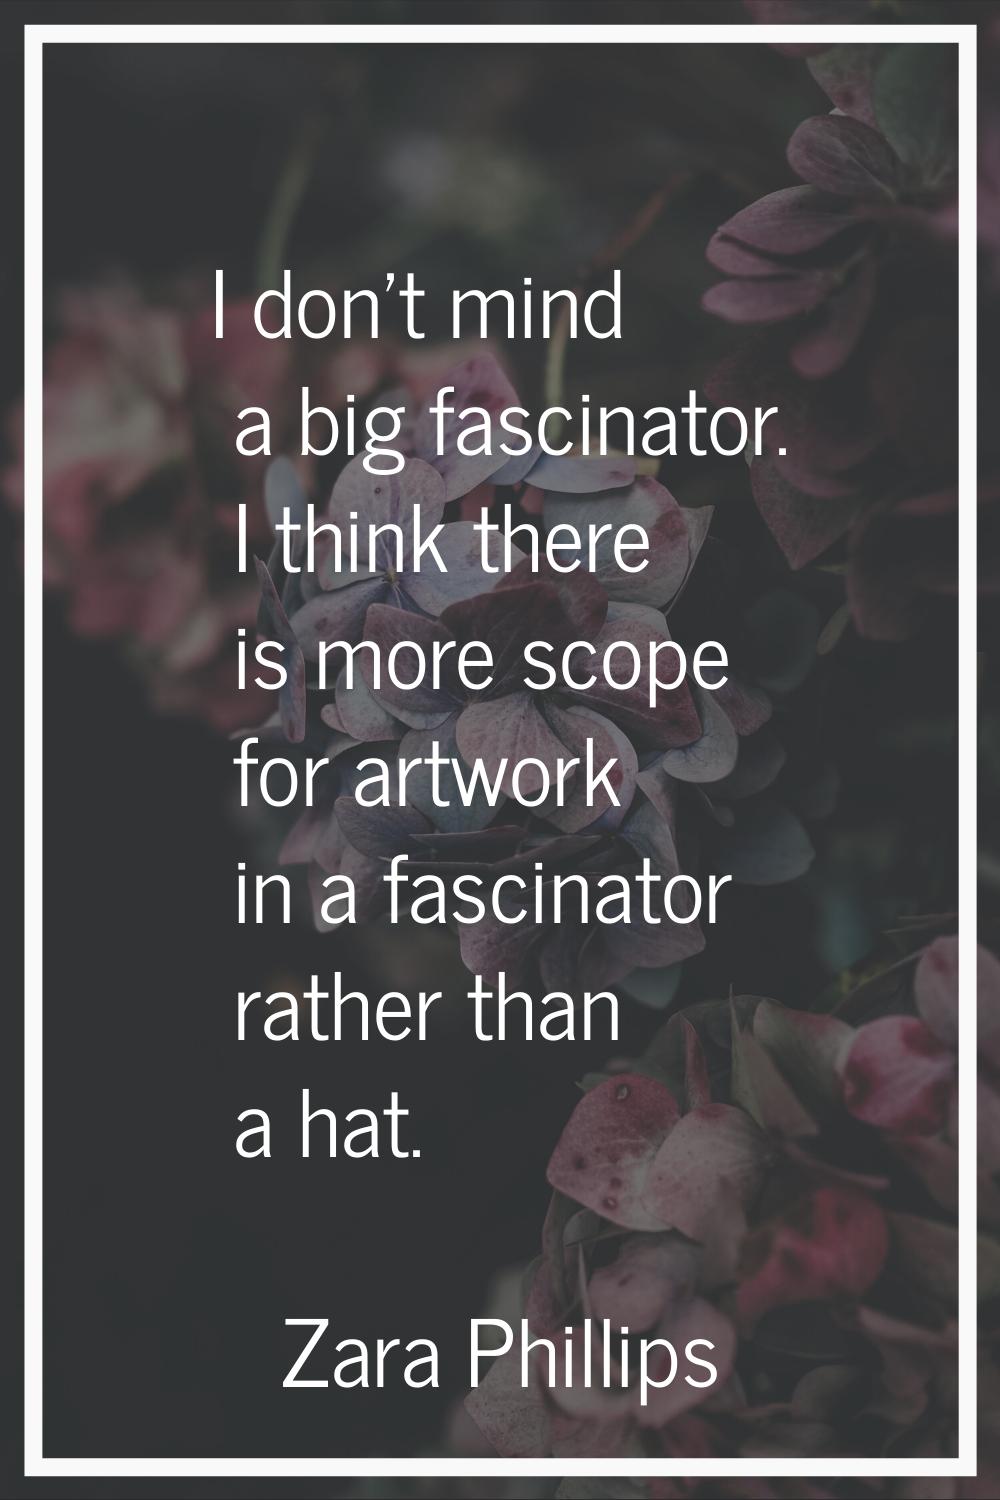 I don't mind a big fascinator. I think there is more scope for artwork in a fascinator rather than 